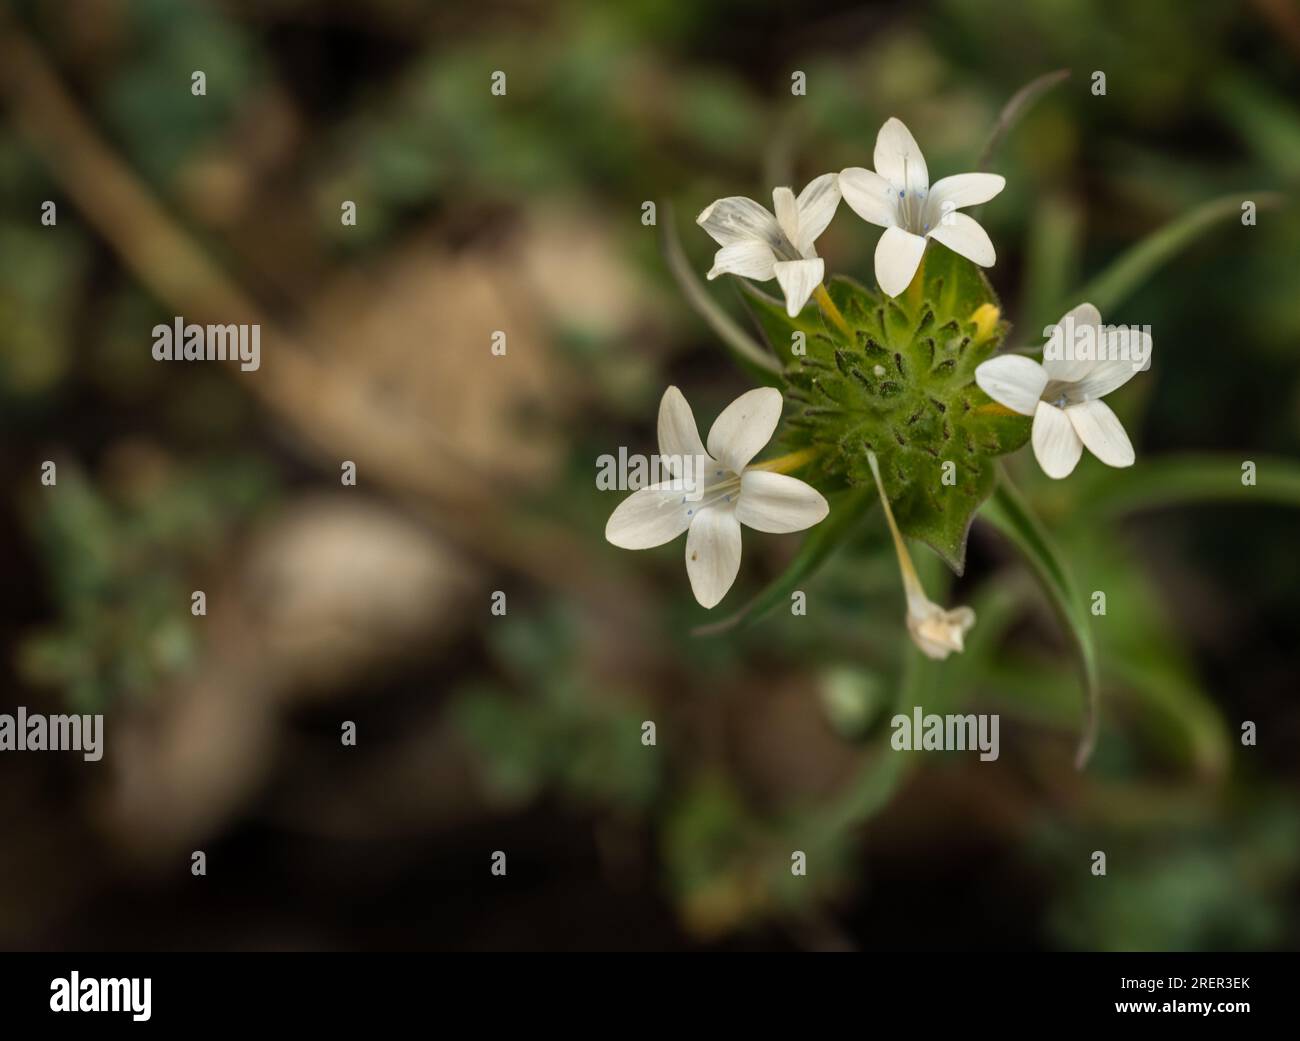 Blooms of Grand Collomia Pop Out From Dark Forest Floor in Yosemite Stock Photo